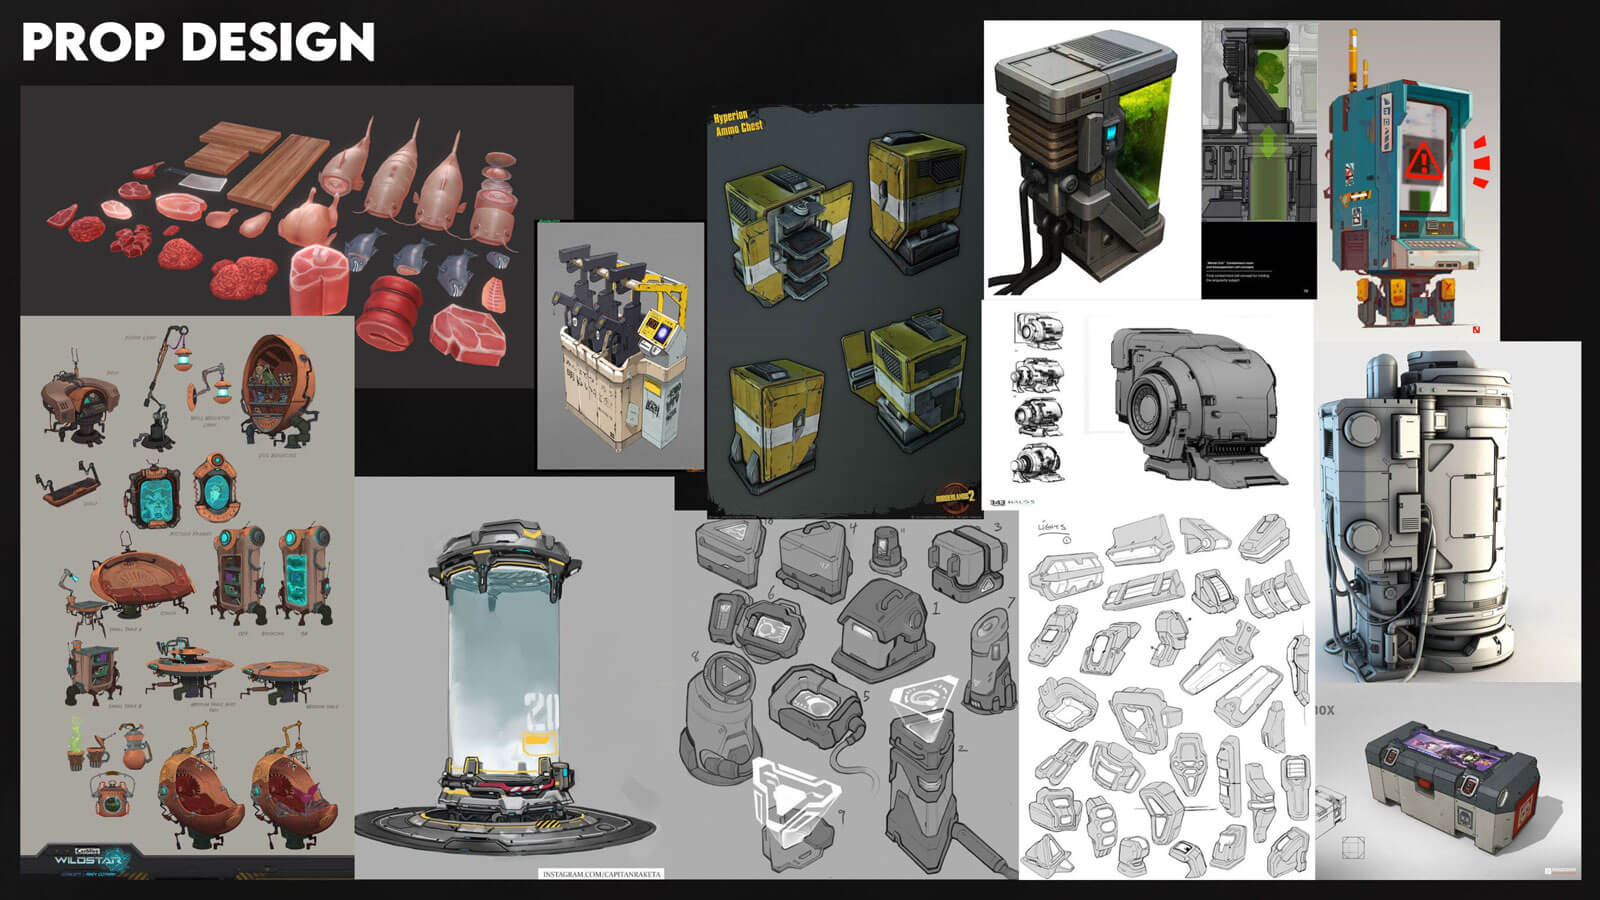 A collage of images displaying both 3D objects in the scene as well as concept drawings of the props